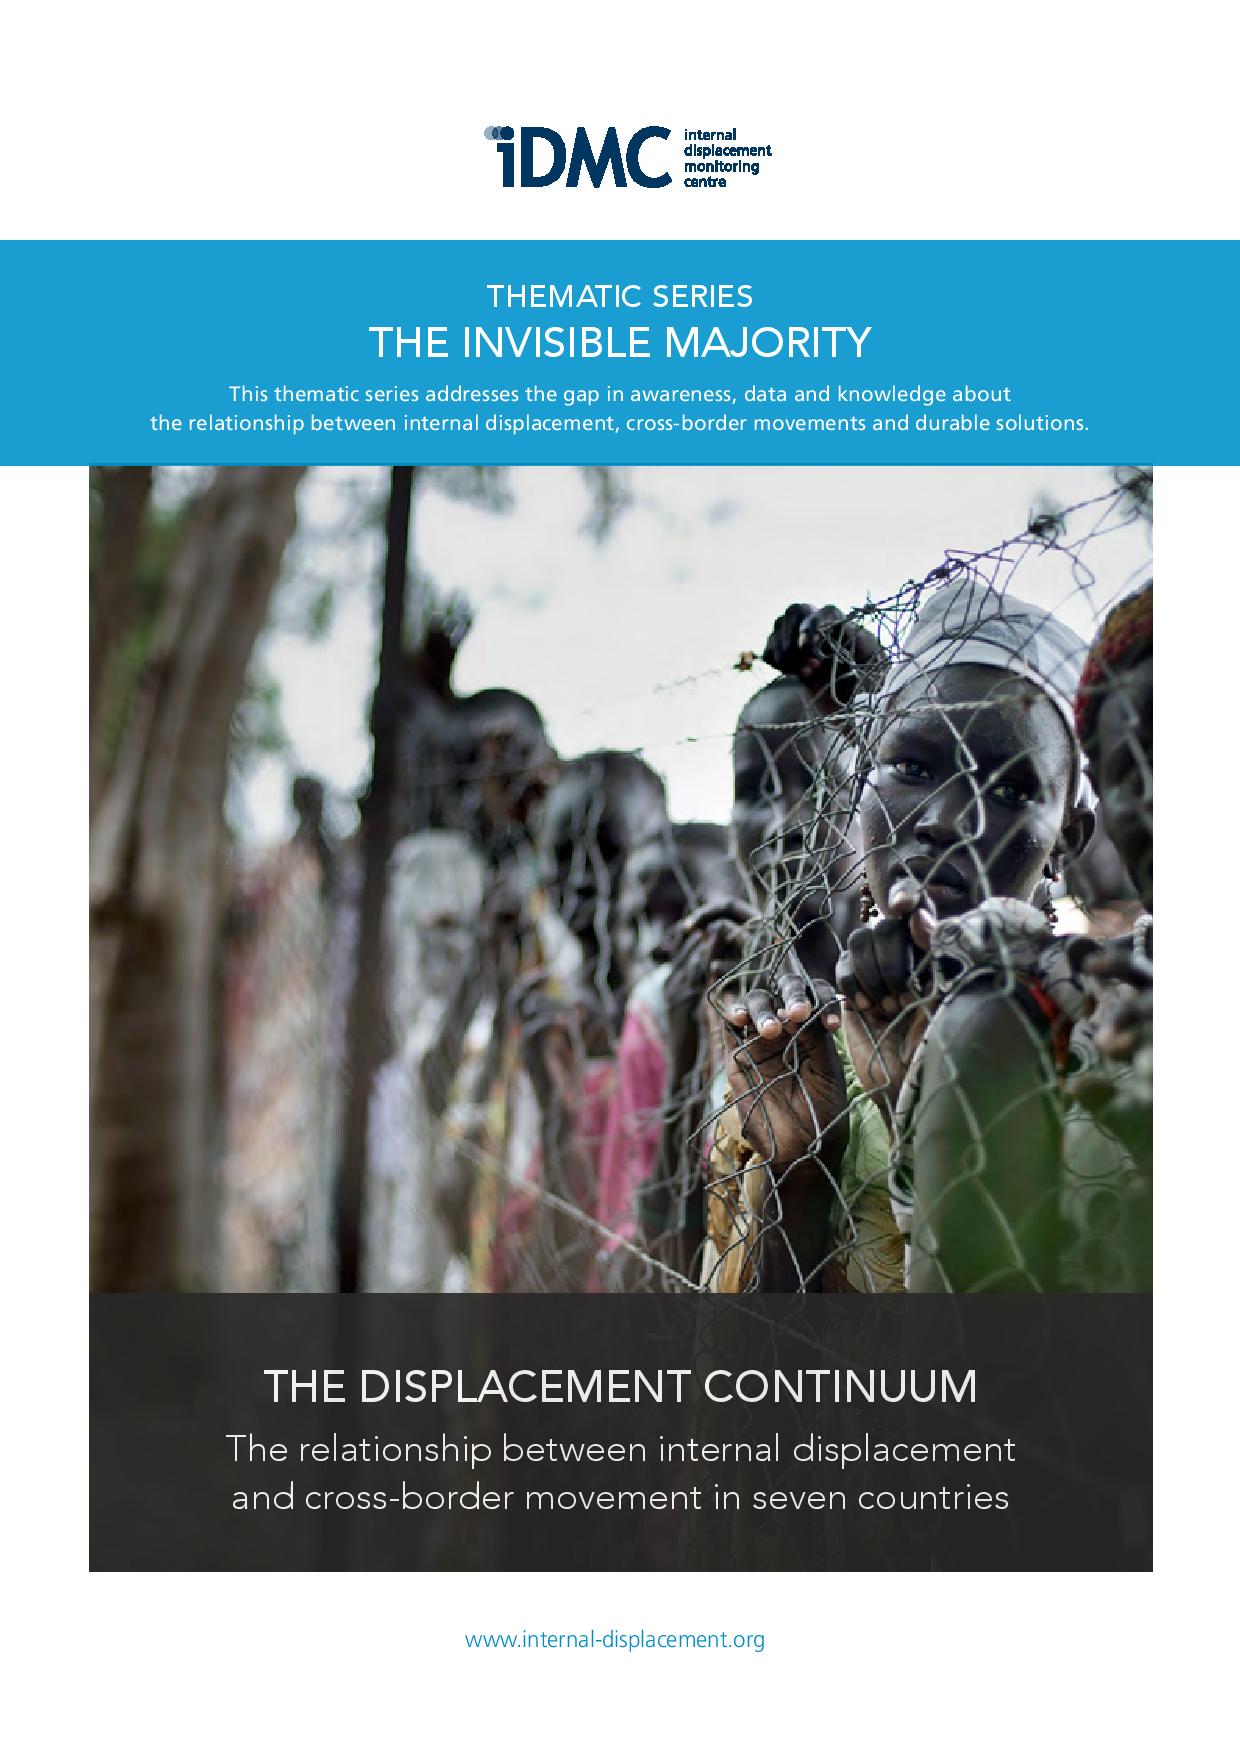 The displacement continuum: the relationship between internal displacement and cross-border movement in seven countries